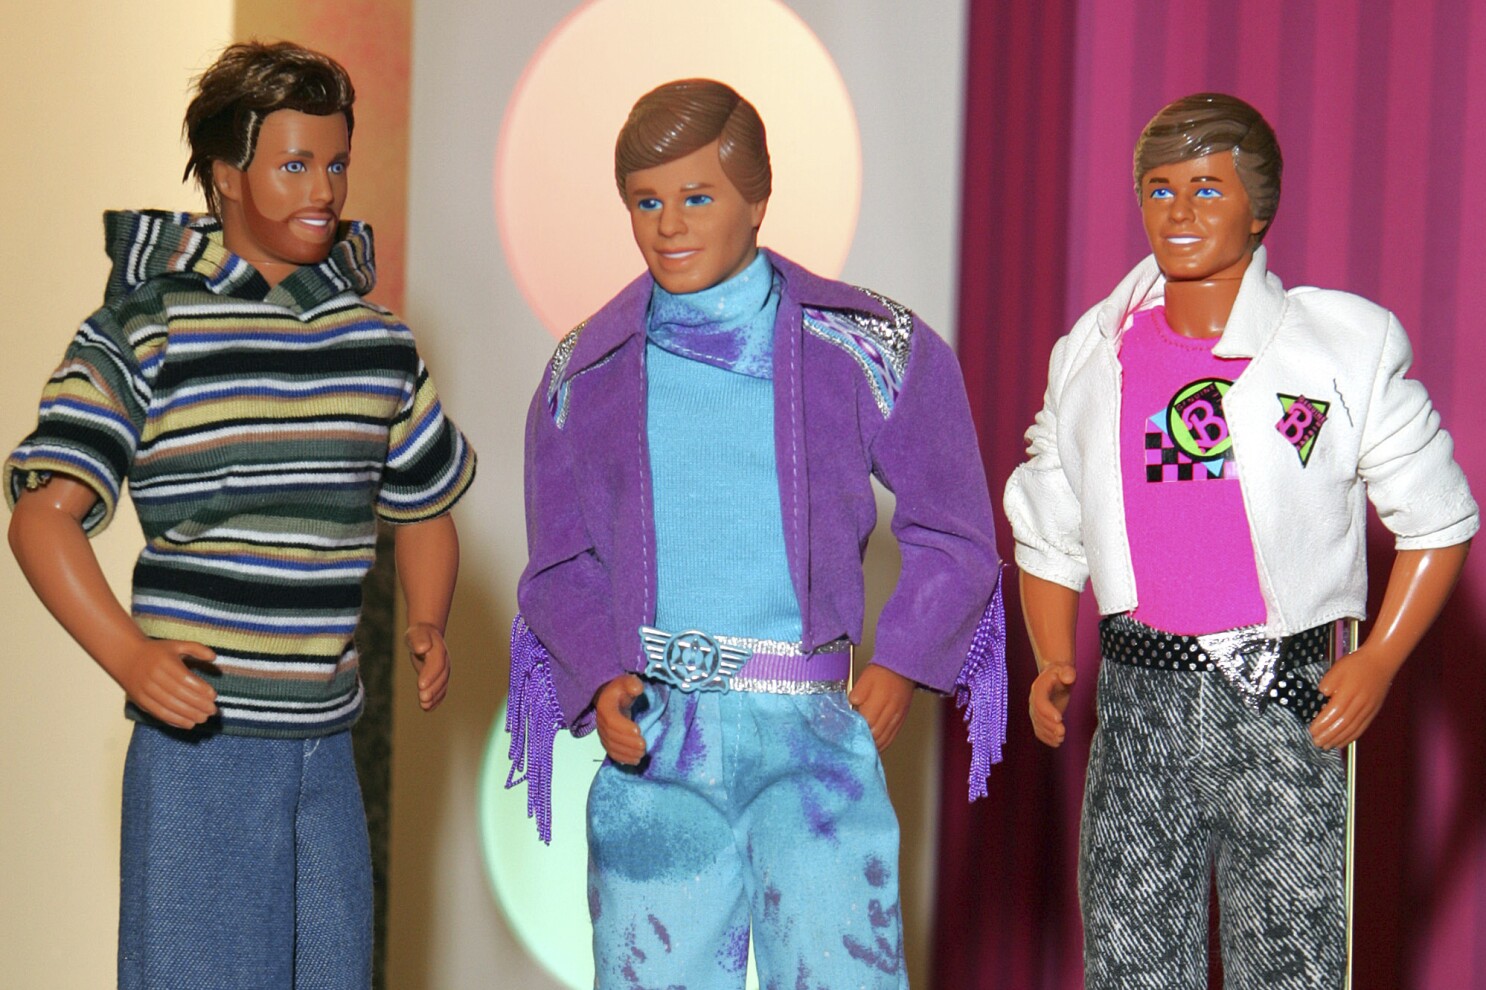 He's 'just Ken' but will the 'Barbie' movie change his popularity